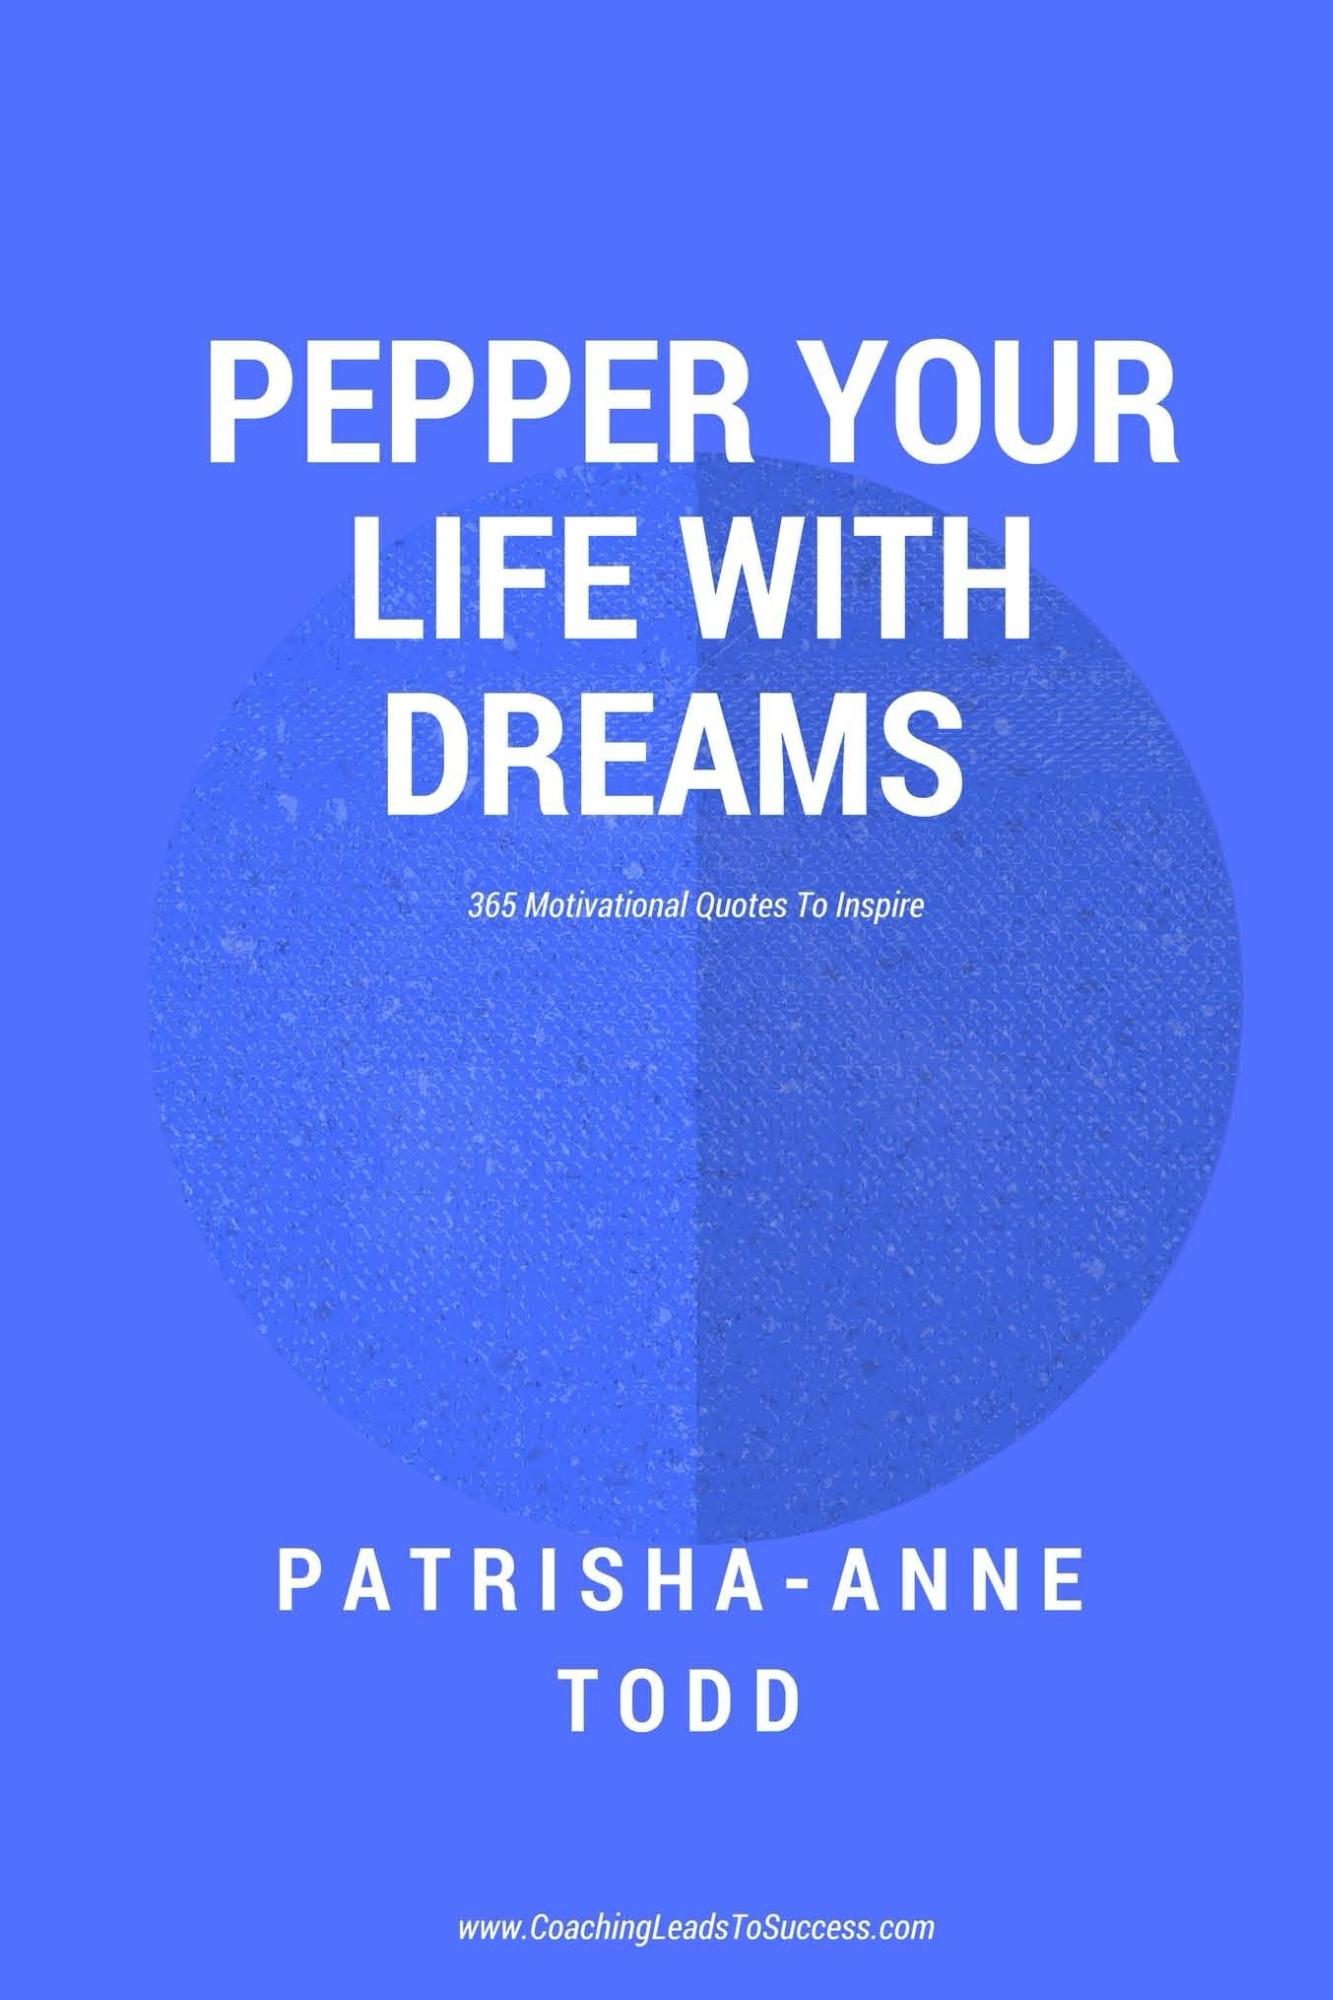 Pepper Your Life with Dreams, the little book on Life Coaching by Master Coach PaTrisha-Anne Todd